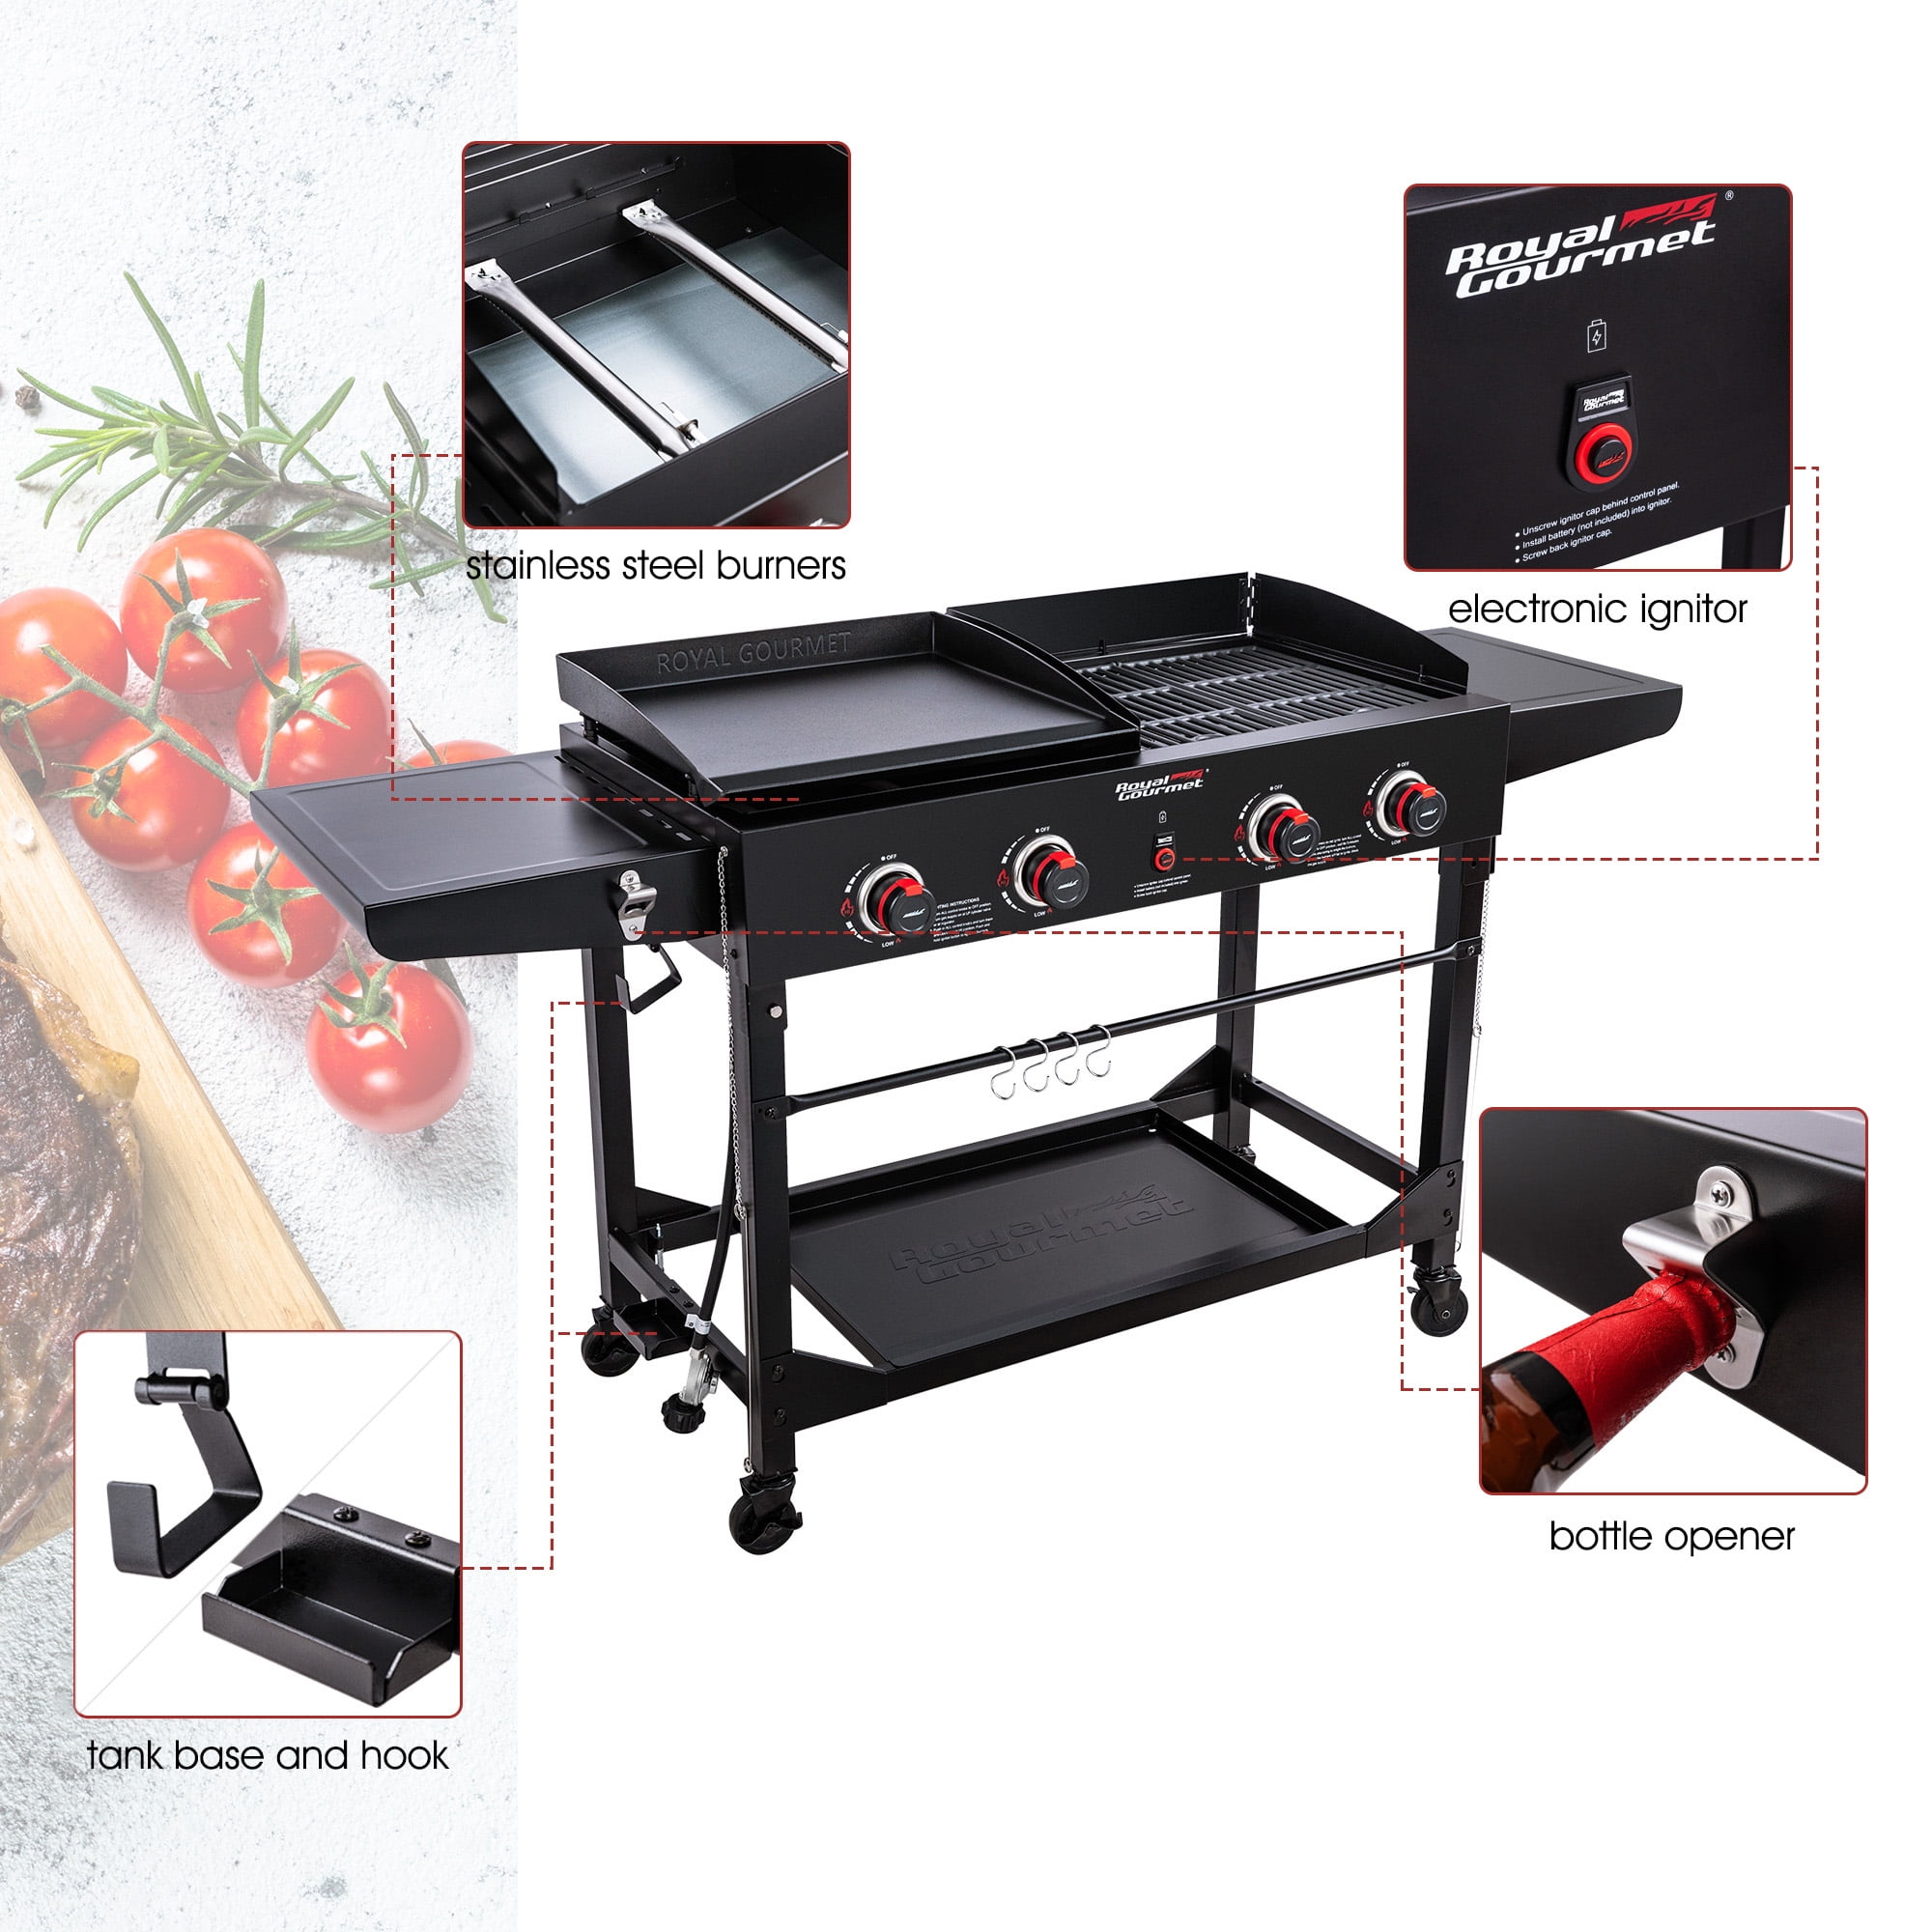  Royal Gourmet GD402 4-Burner Portable Flat Top Gas Grill and  Griddle Combo with Folding Legs, 48,000 BTU, Black : Patio, Lawn & Garden